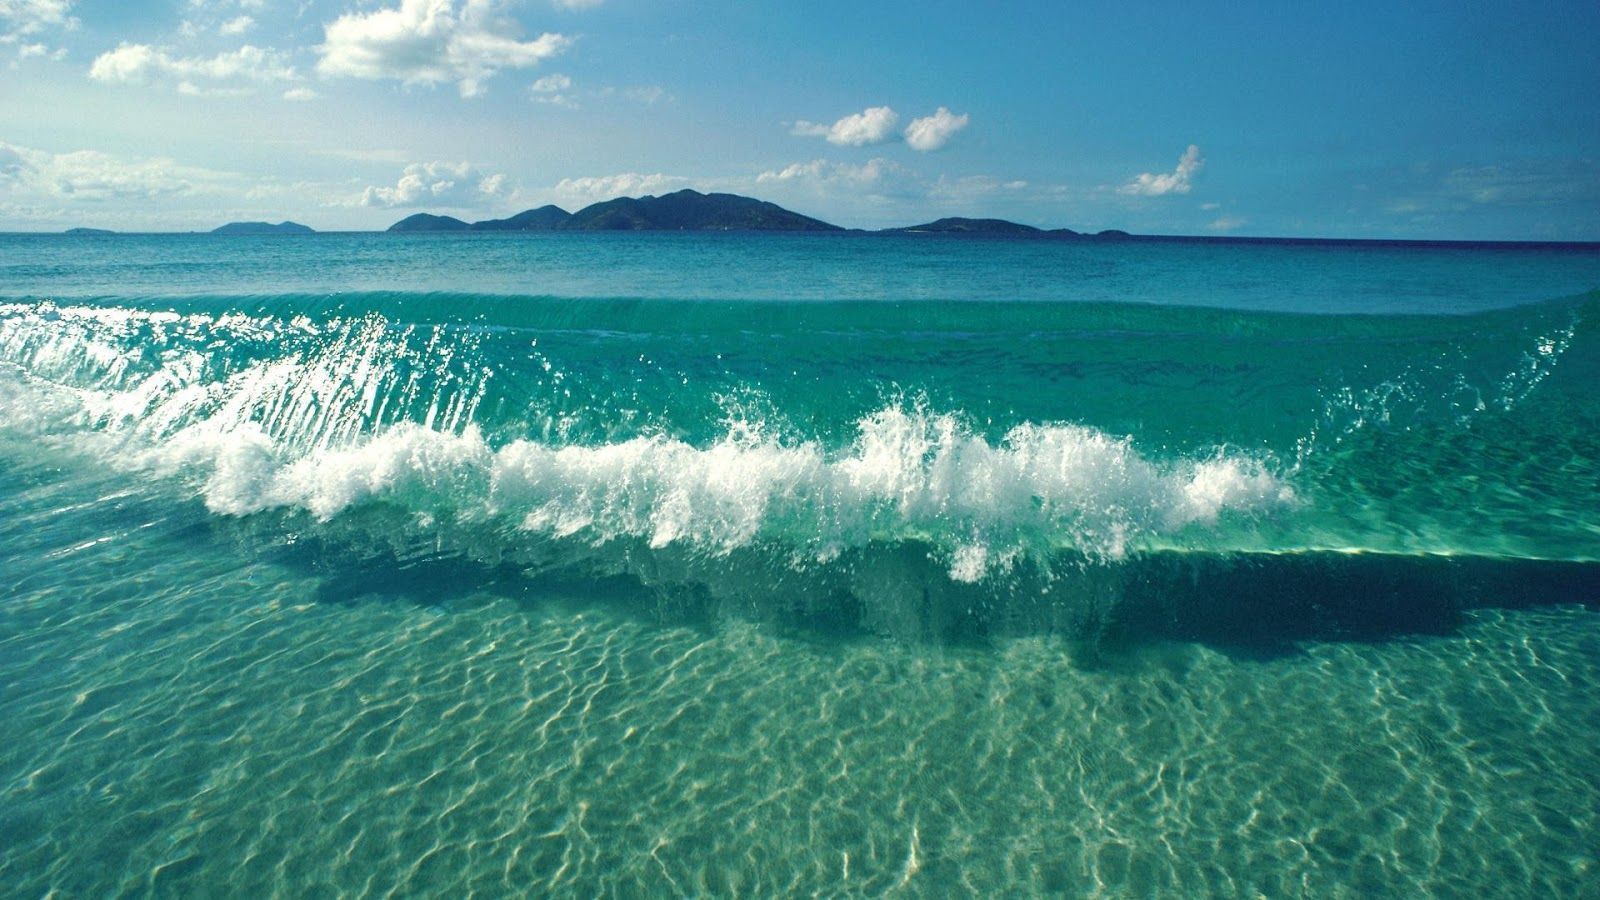 Download Free Ocean Waves Wallpapers | Most beautiful places in ...